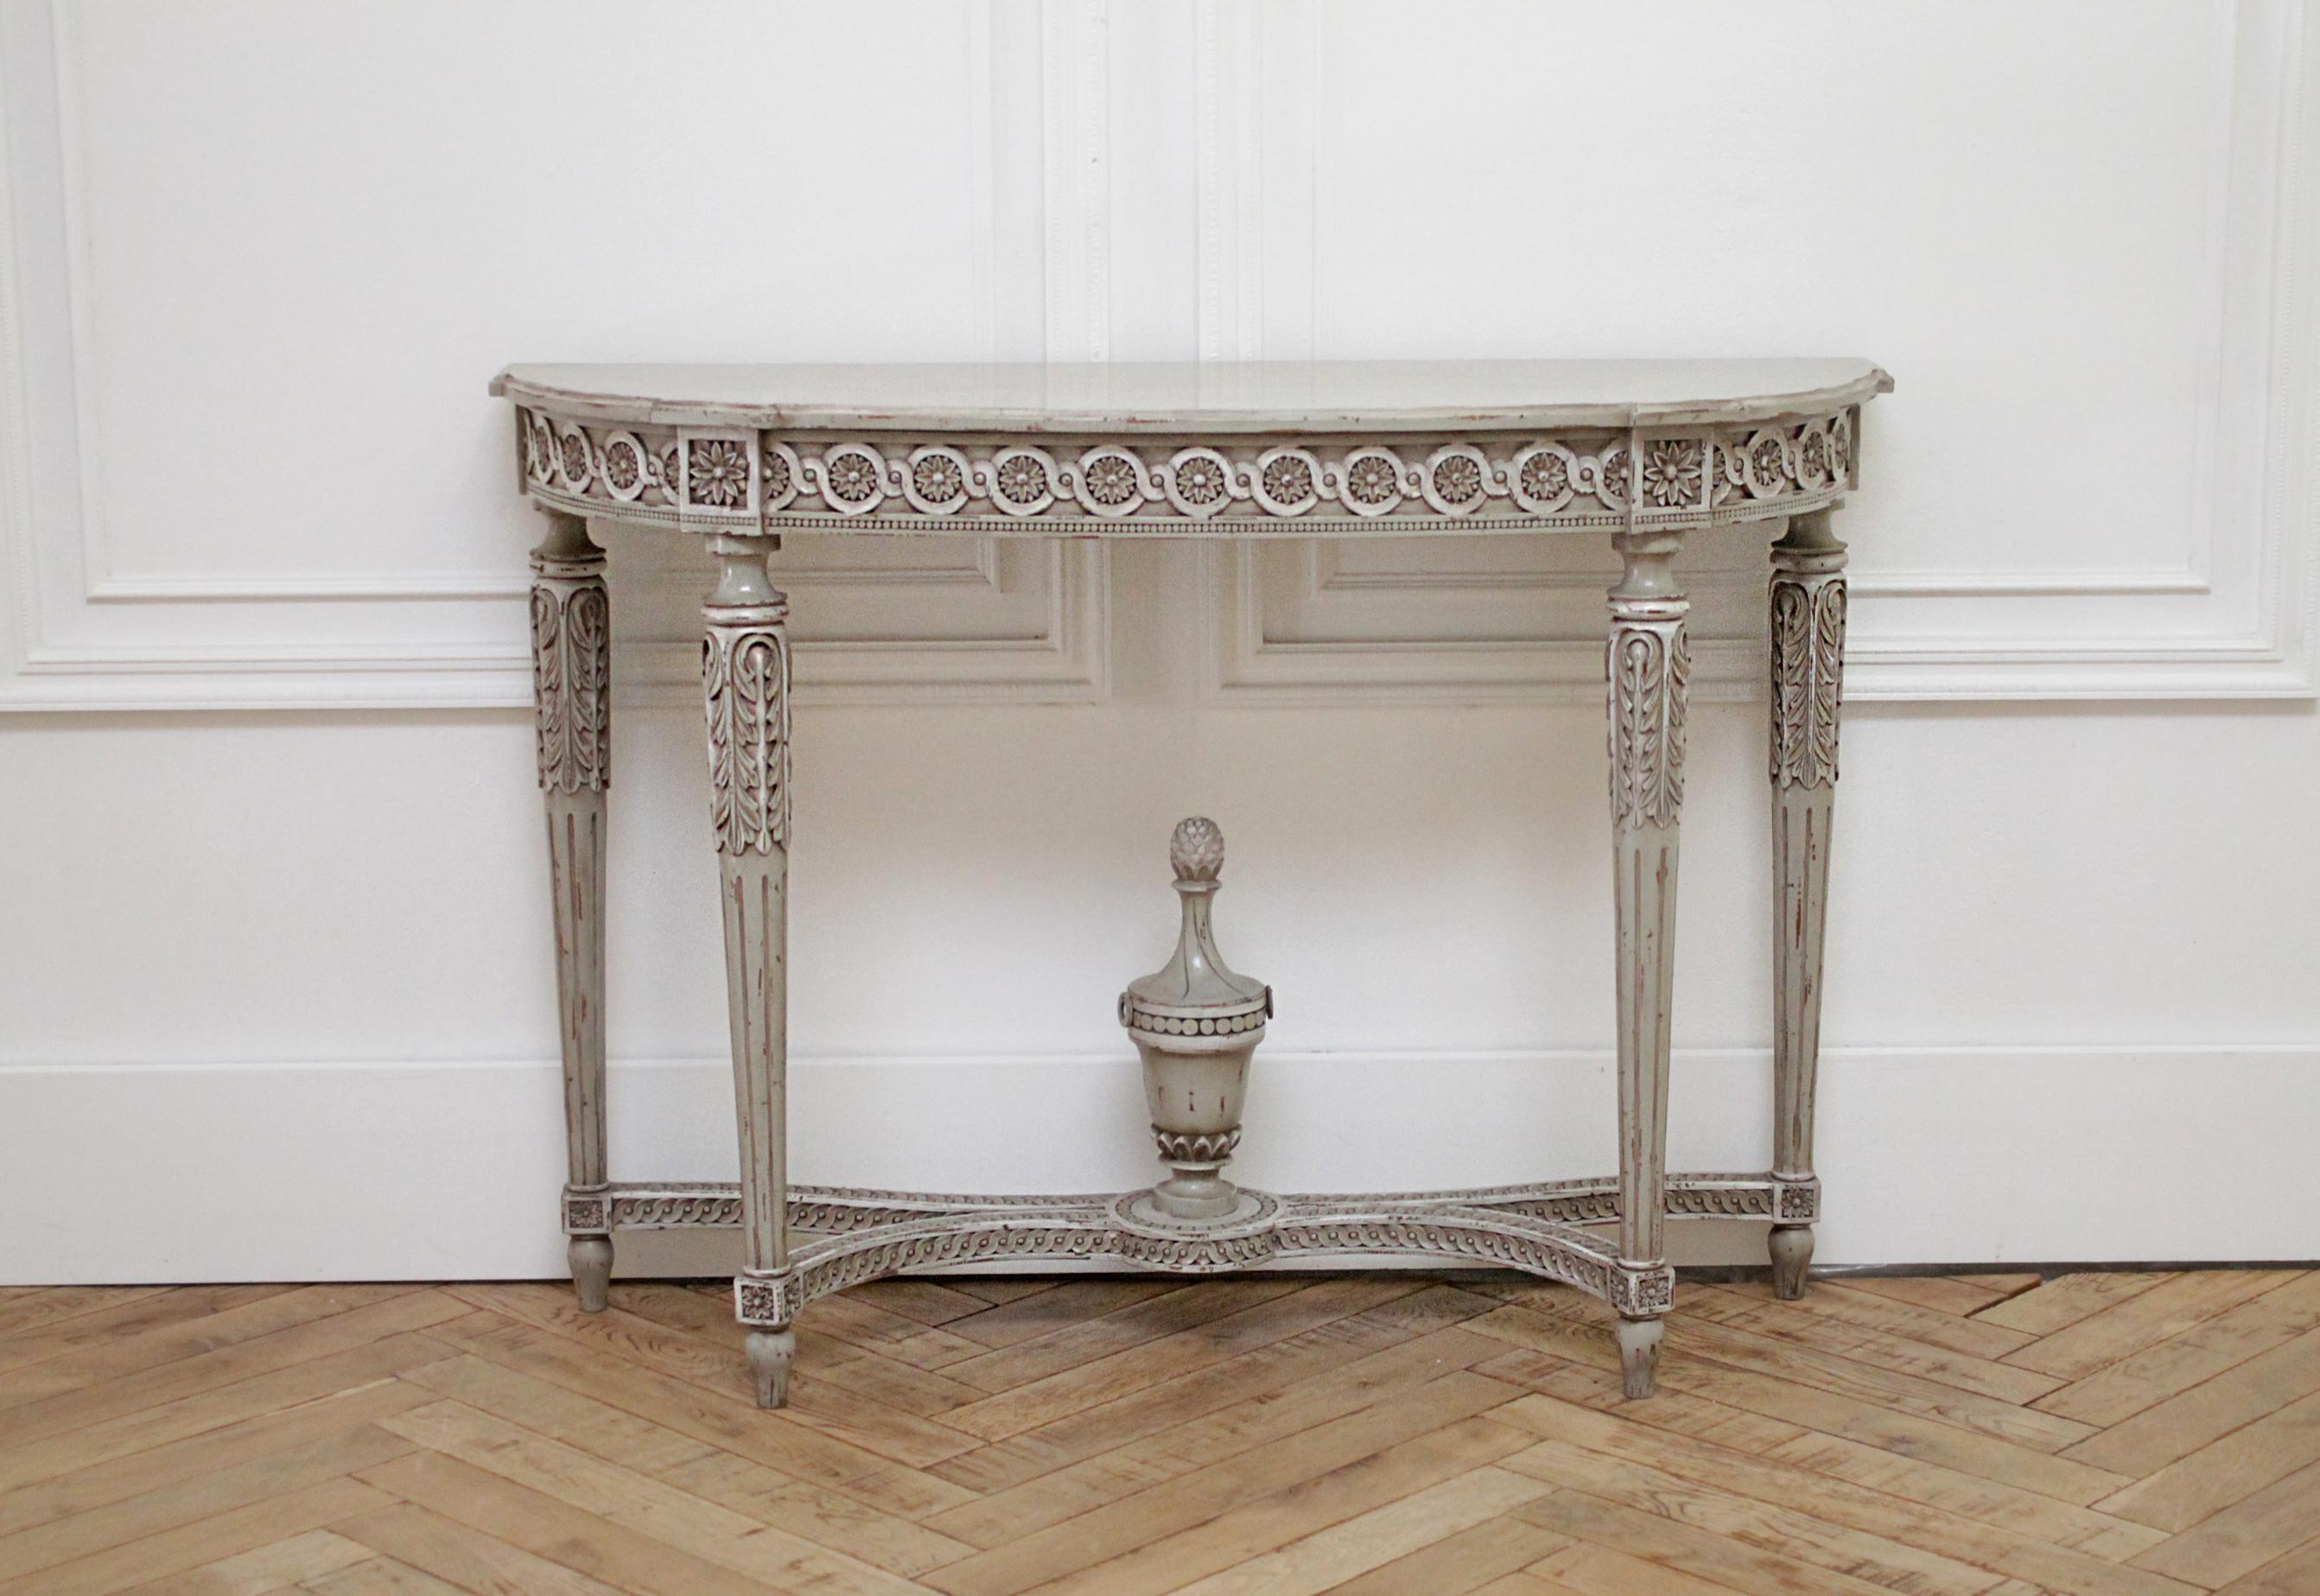 Vintage French Louis XVI style original painted and carved console table
Beautiful painted with original French gray tone, with an antique patina. This console is free standing and does not need to be attached to a wall. Legs are a nice tapered